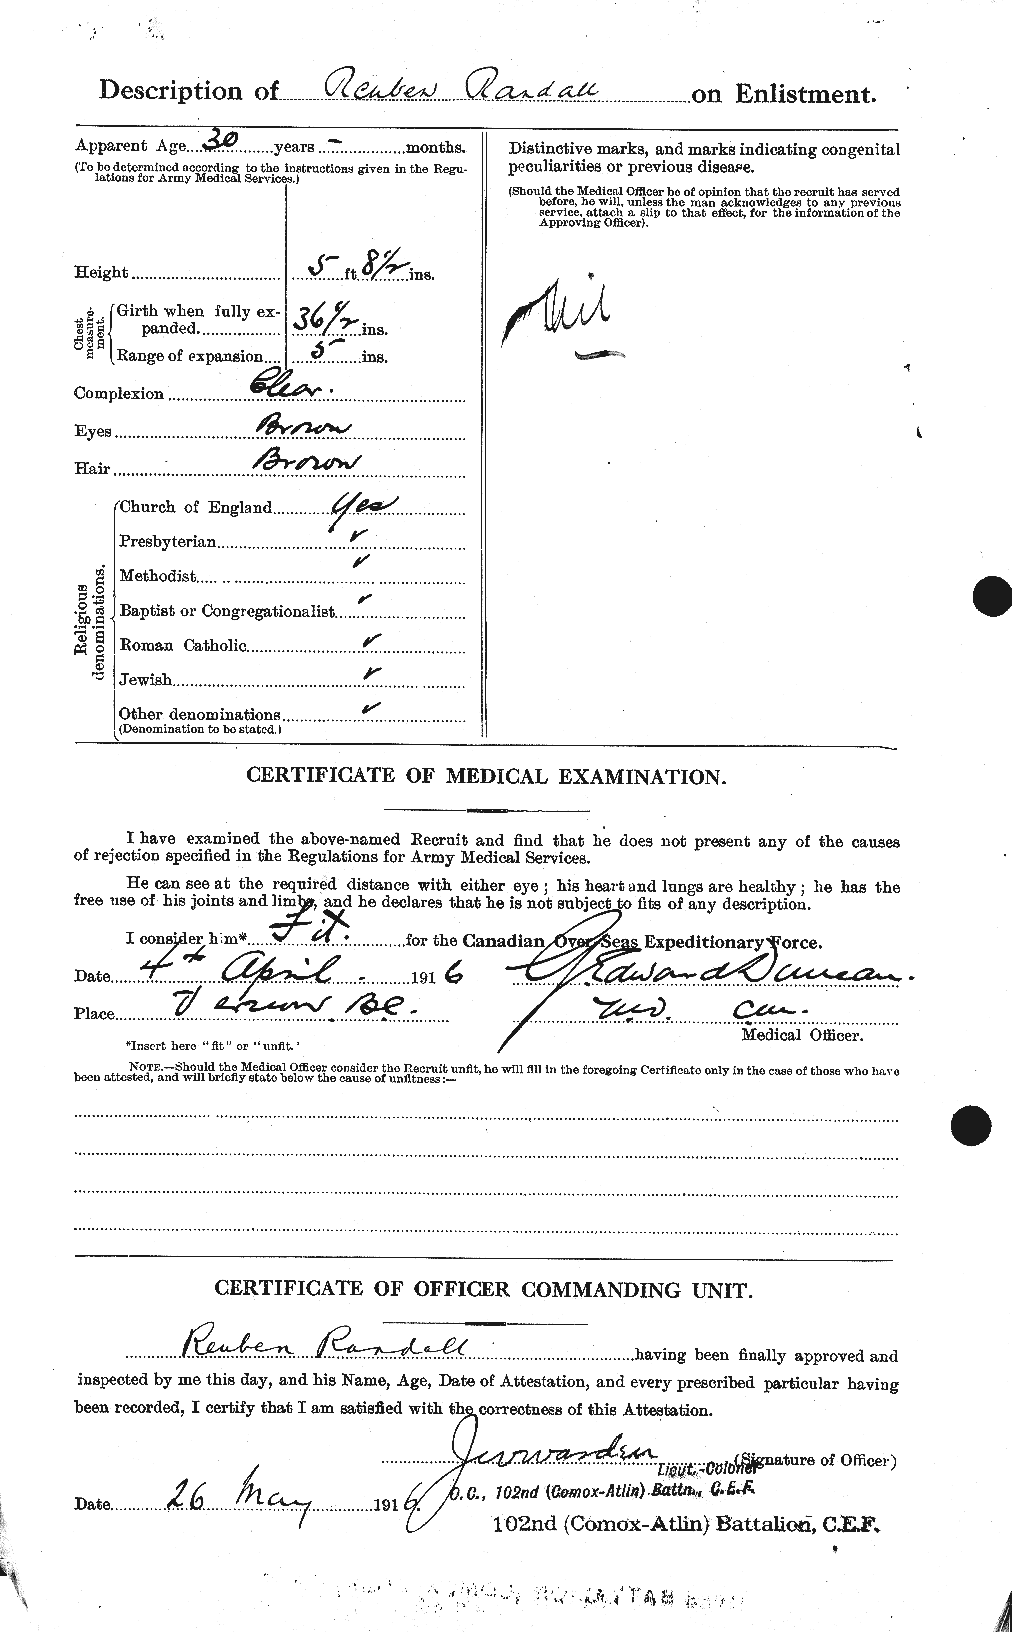 Personnel Records of the First World War - CEF 594102b